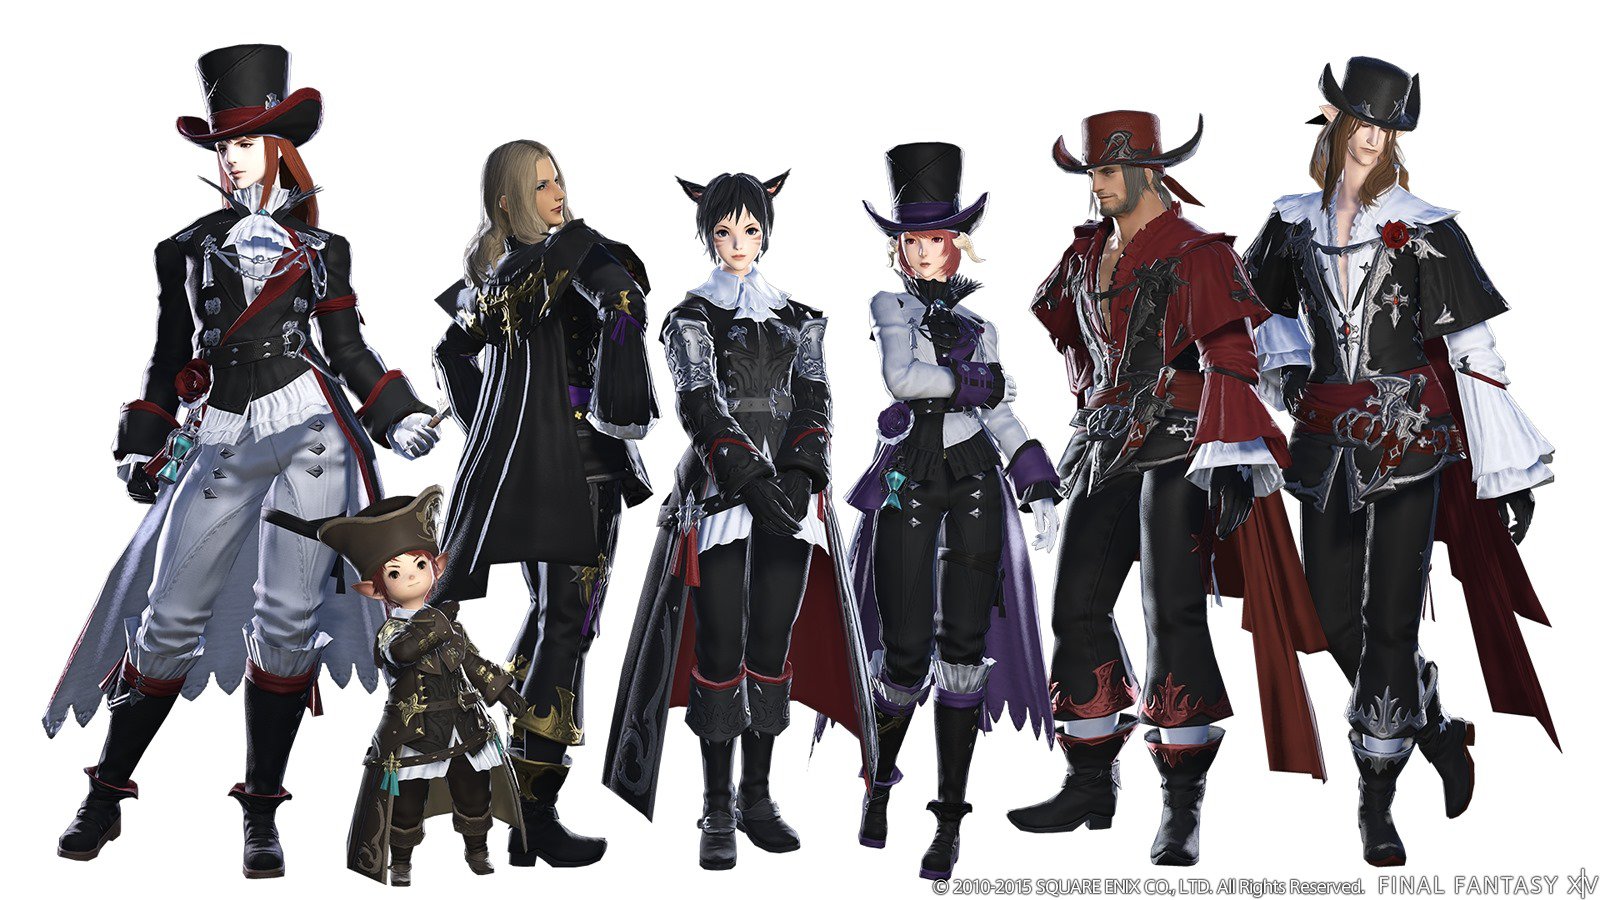 Final Fantasy XIV Details Patch 3.1 Dungeons, Flying Mounts, and More